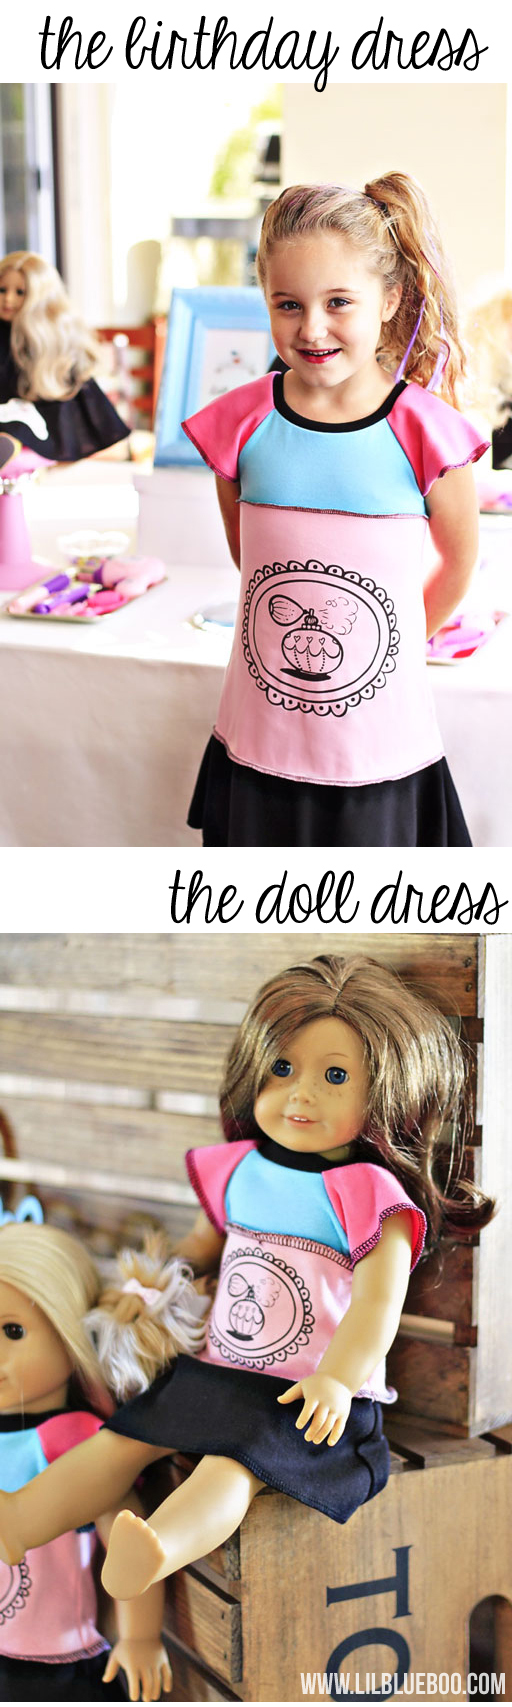 Birthday Dress with Matching American Girl Doll Dress for Salon Party via lilblueboo.com #americangirl #party #diy